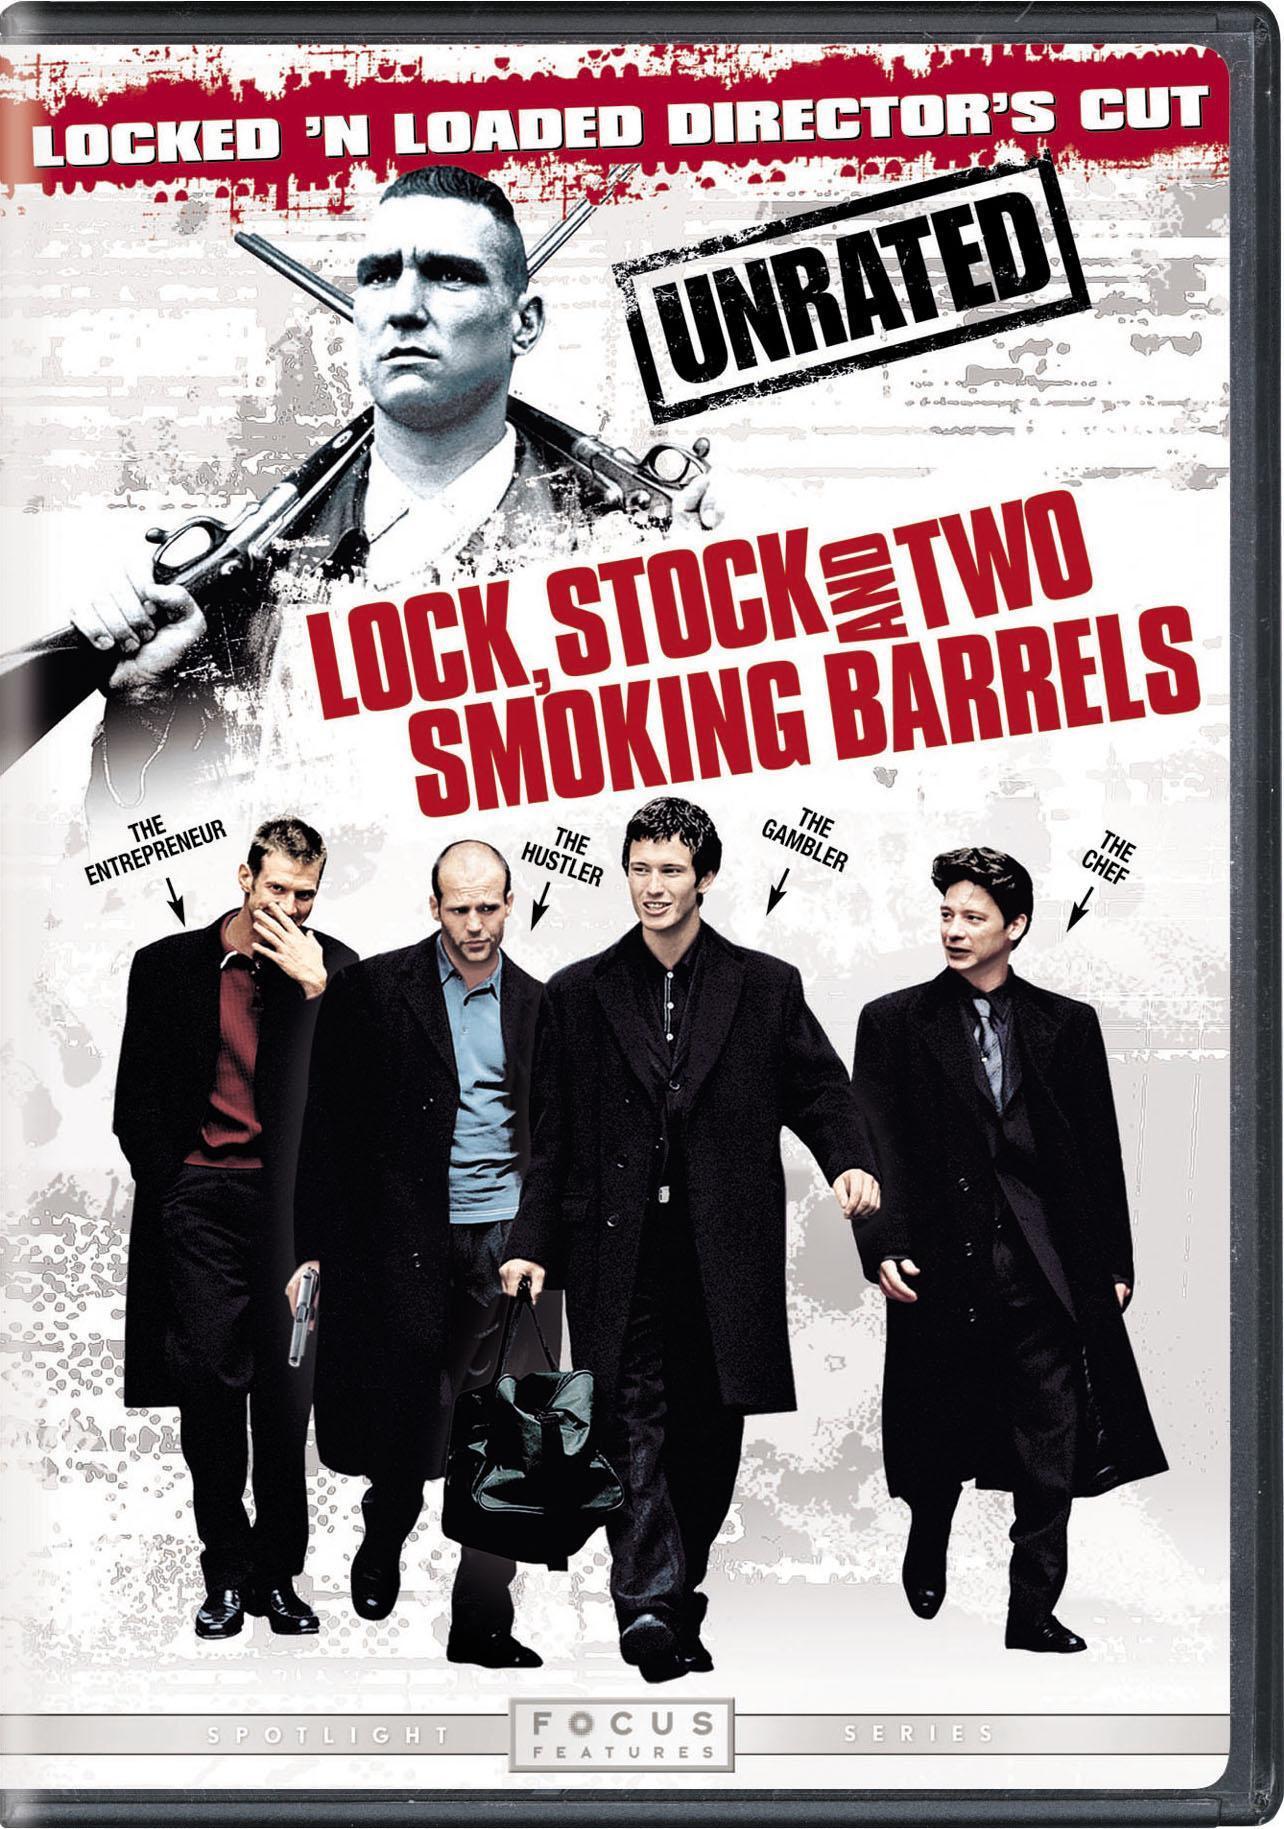 Lock, Stock And Two Smoking Barrels (DVD Unrated Director's Cut) - DVD [ 1999 ]  - Comedy Movies On DVD - Movies On GRUV